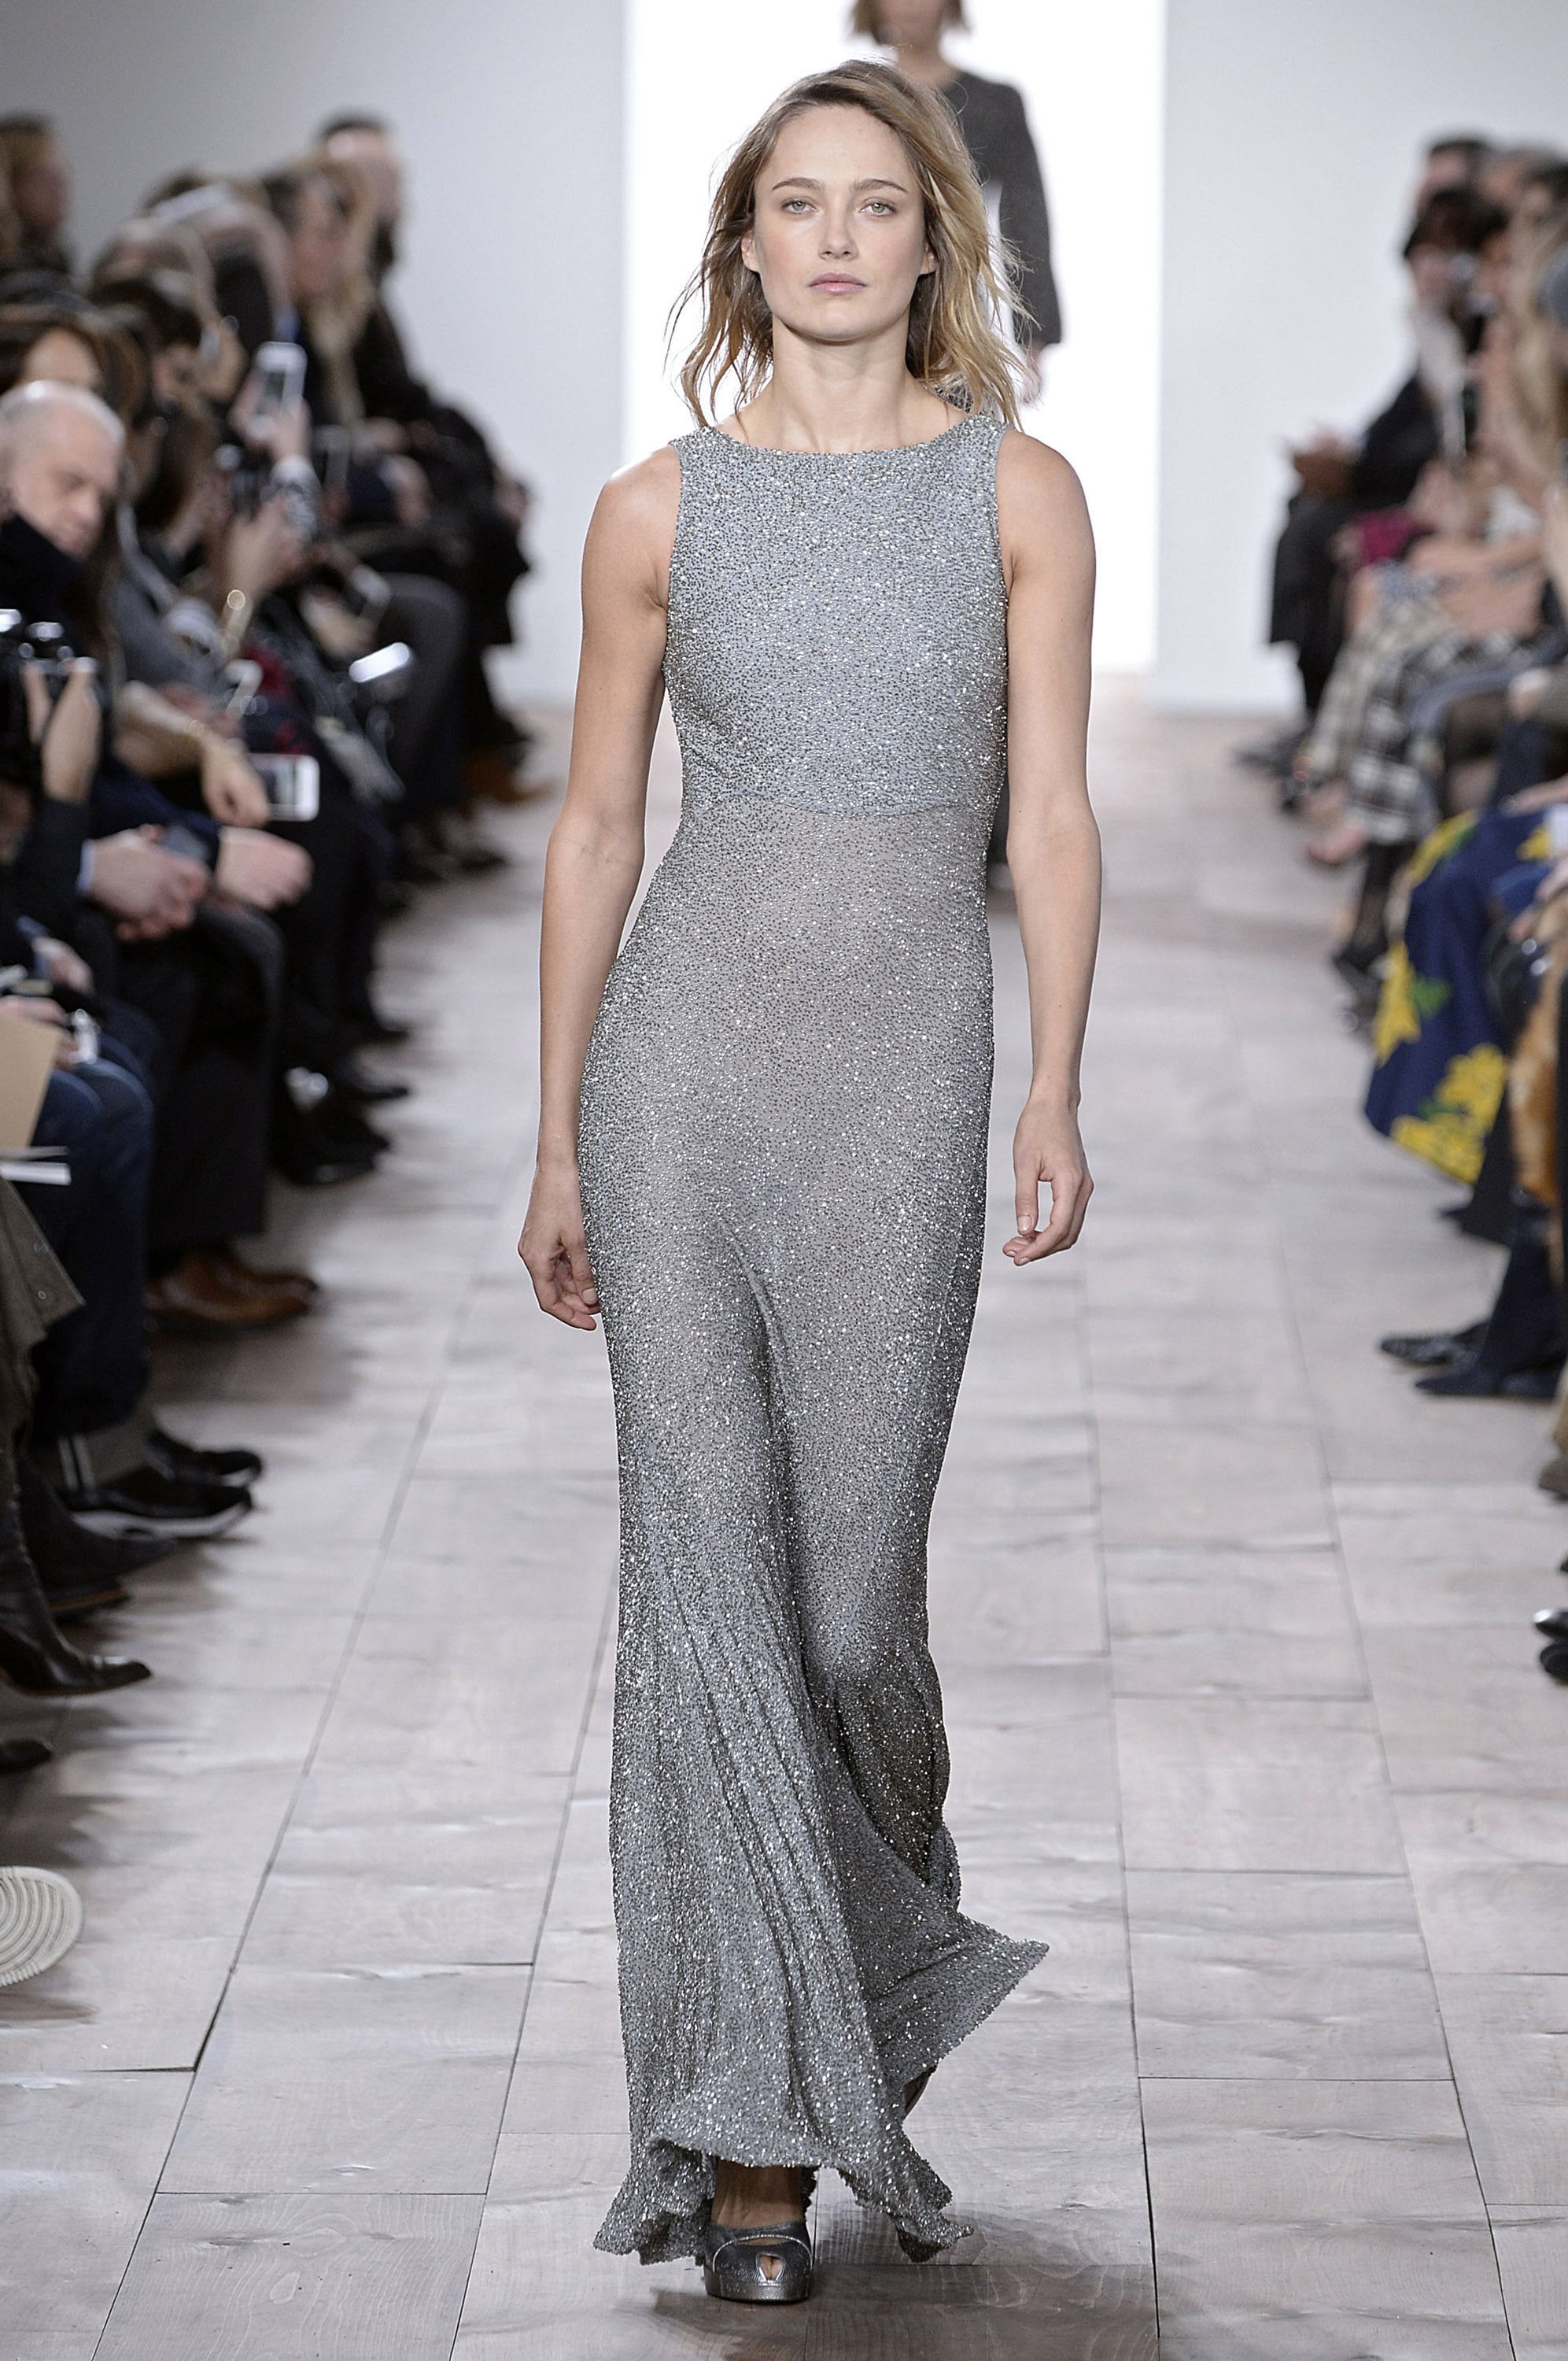 husdyr skyskraber længde Michael Kors Fall 2015 | The Fall '15 Gowns That Should Walk Right Off the  Runway Onto the Red Carpet | POPSUGAR Fashion Photo 27